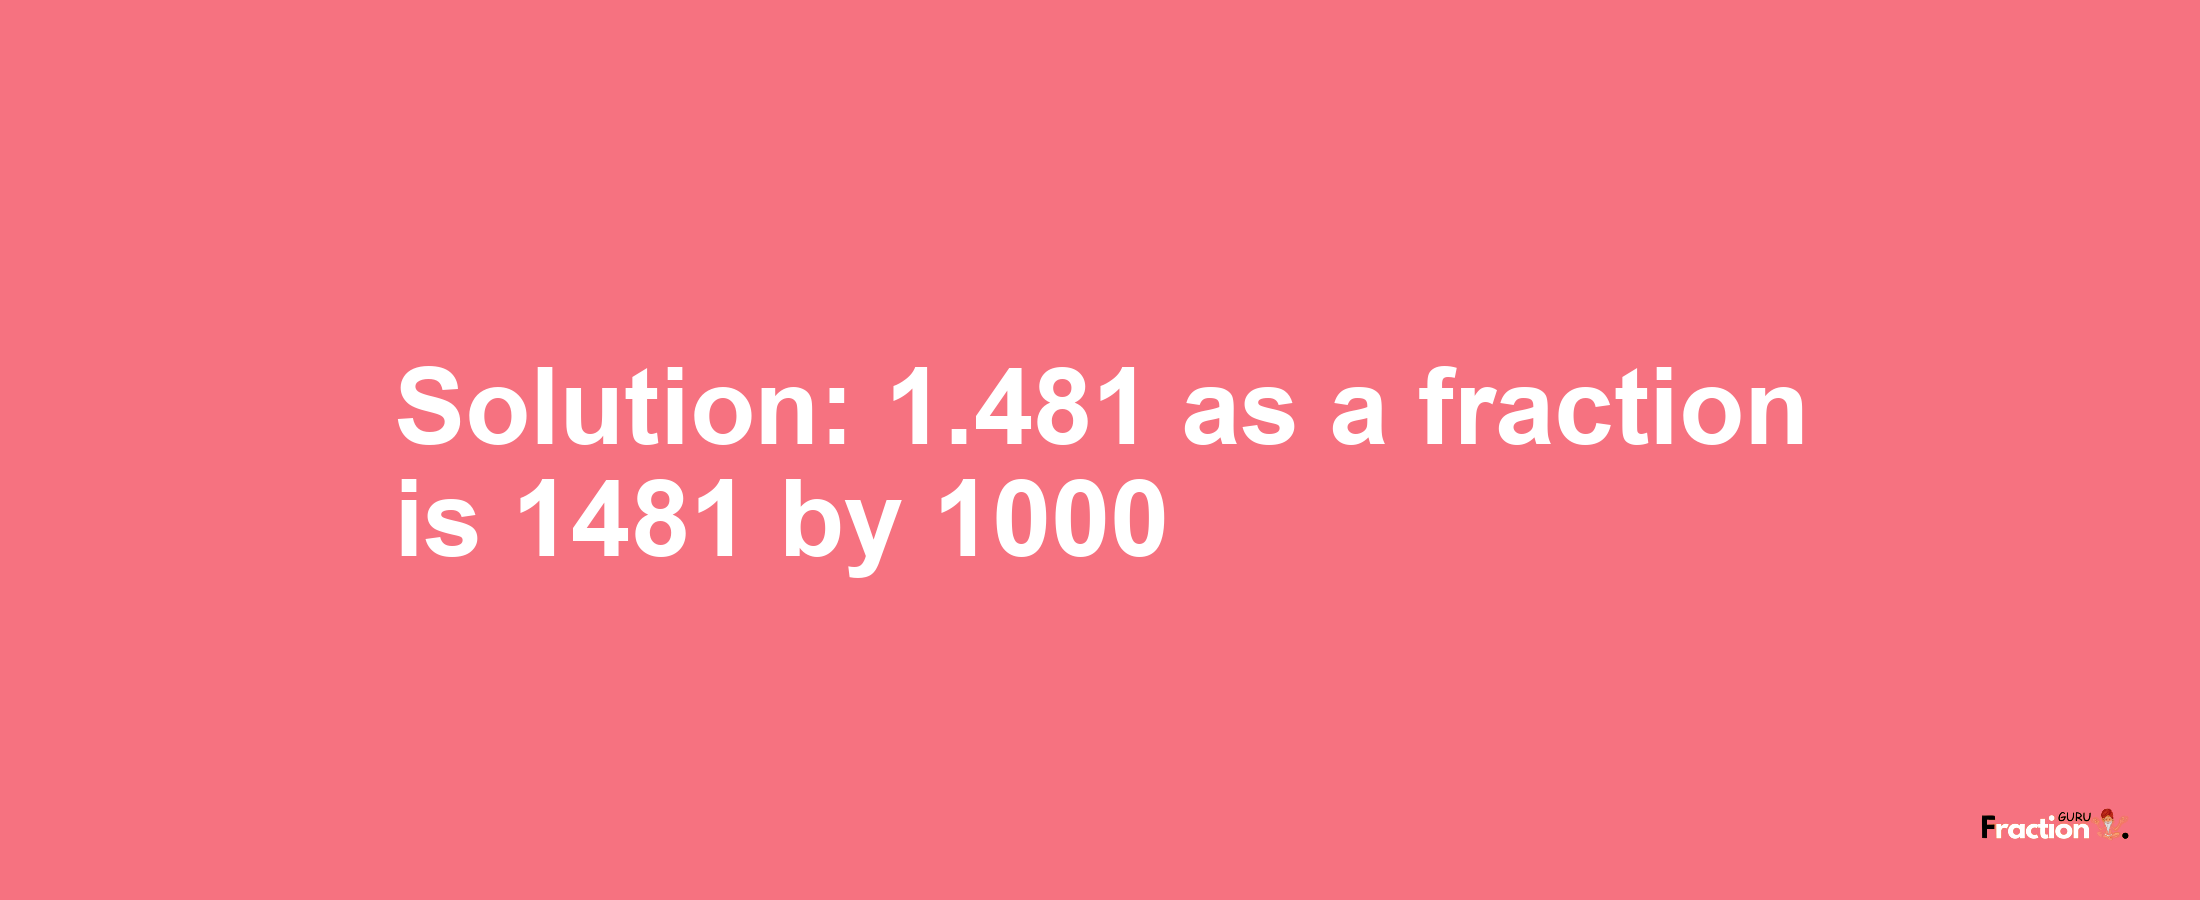 Solution:1.481 as a fraction is 1481/1000